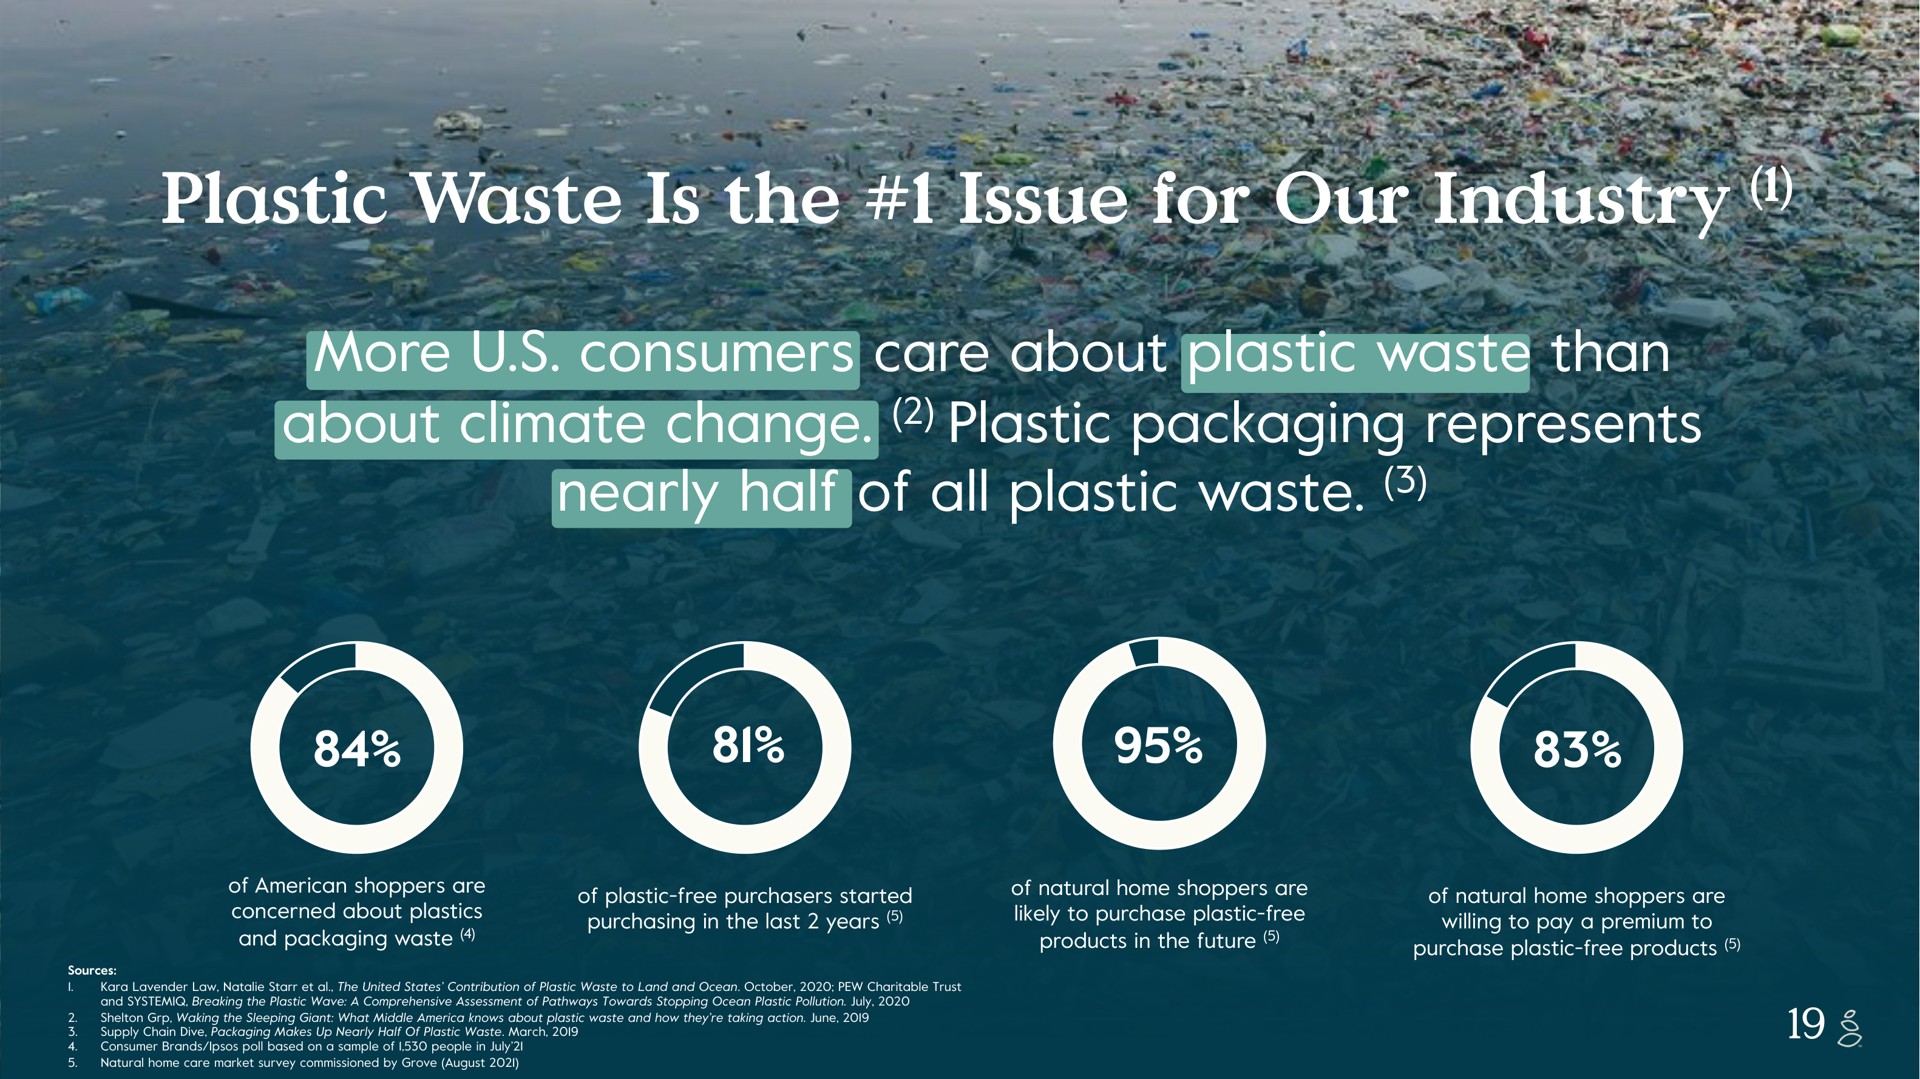 plastic waste is the issue for our industry more consumers care about plastic waste than about climate change plastic packaging represents nearly half of all plastic waste seem can a i a oes he and plastic free purchasers started mae natural home shoppers are likely to one products in future natural home shoppers are willing to pay a premium to purchase plastic free products sources lavender law united states contribution to land and ocean pew charitable trust and breaking wave a comprehensive assessment pathways towards stopping ocean pollution waking sleeping giant what middle knows and how they taking action june supply chain dive makes up march consumer brands poll based on a sample i people in i natural home market survey commissioned by grove august i | Grove